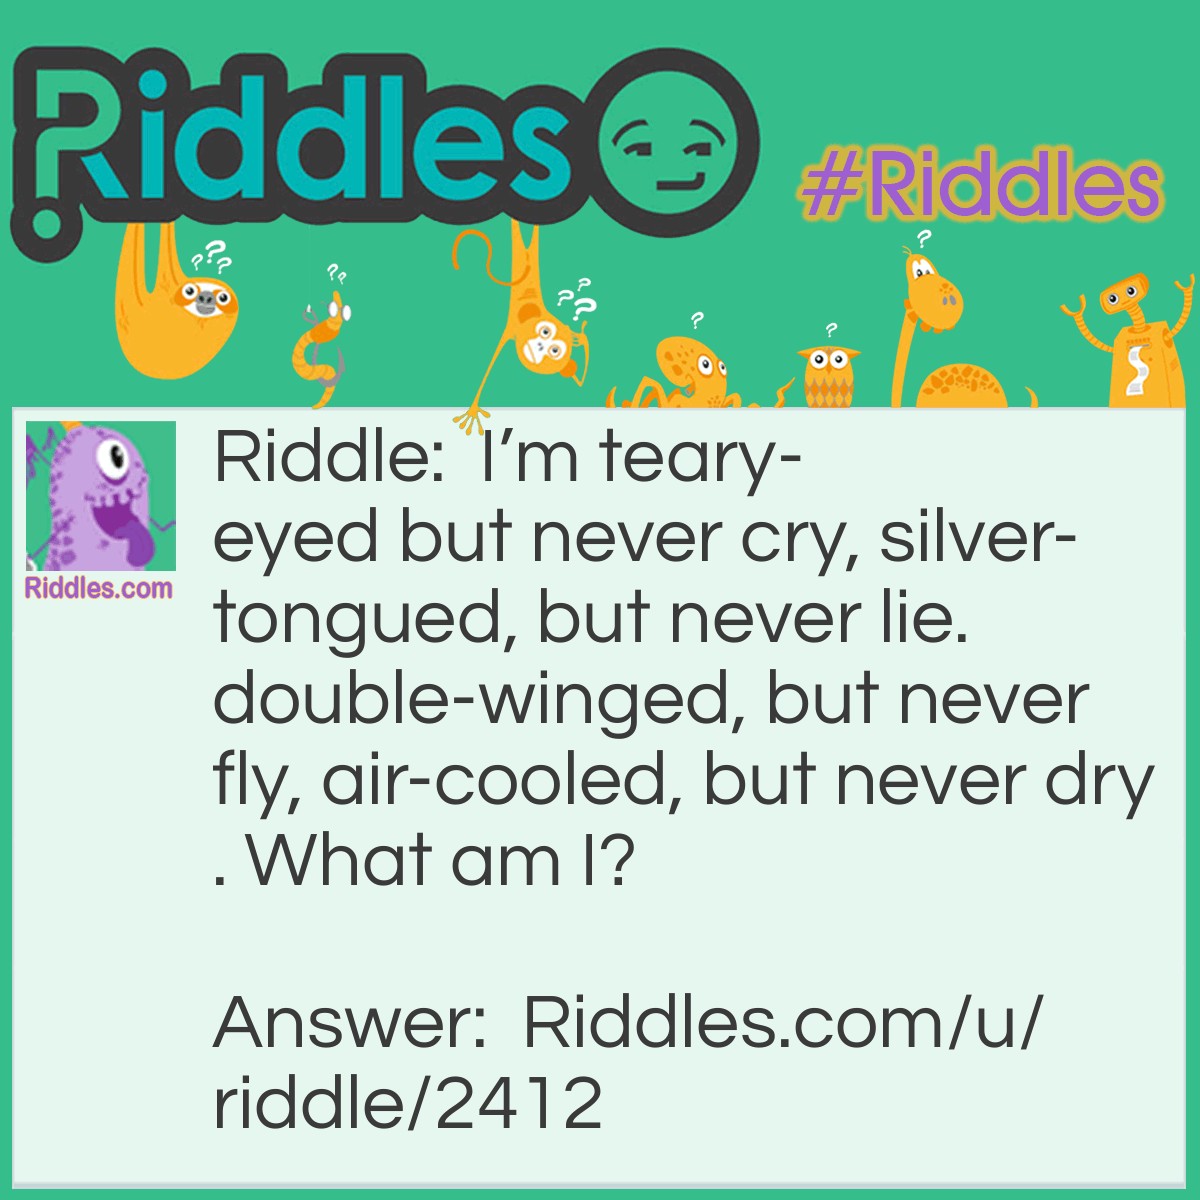 Riddle: I'm teary-eyed but never cry, silver-tongued, but never lie. double-winged, but never fly, air-cooled, but never dry. What am I? Answer: Mercury. The element looks shiny, silver, and is wet. The god Mercury has two wings but only uses them to run.